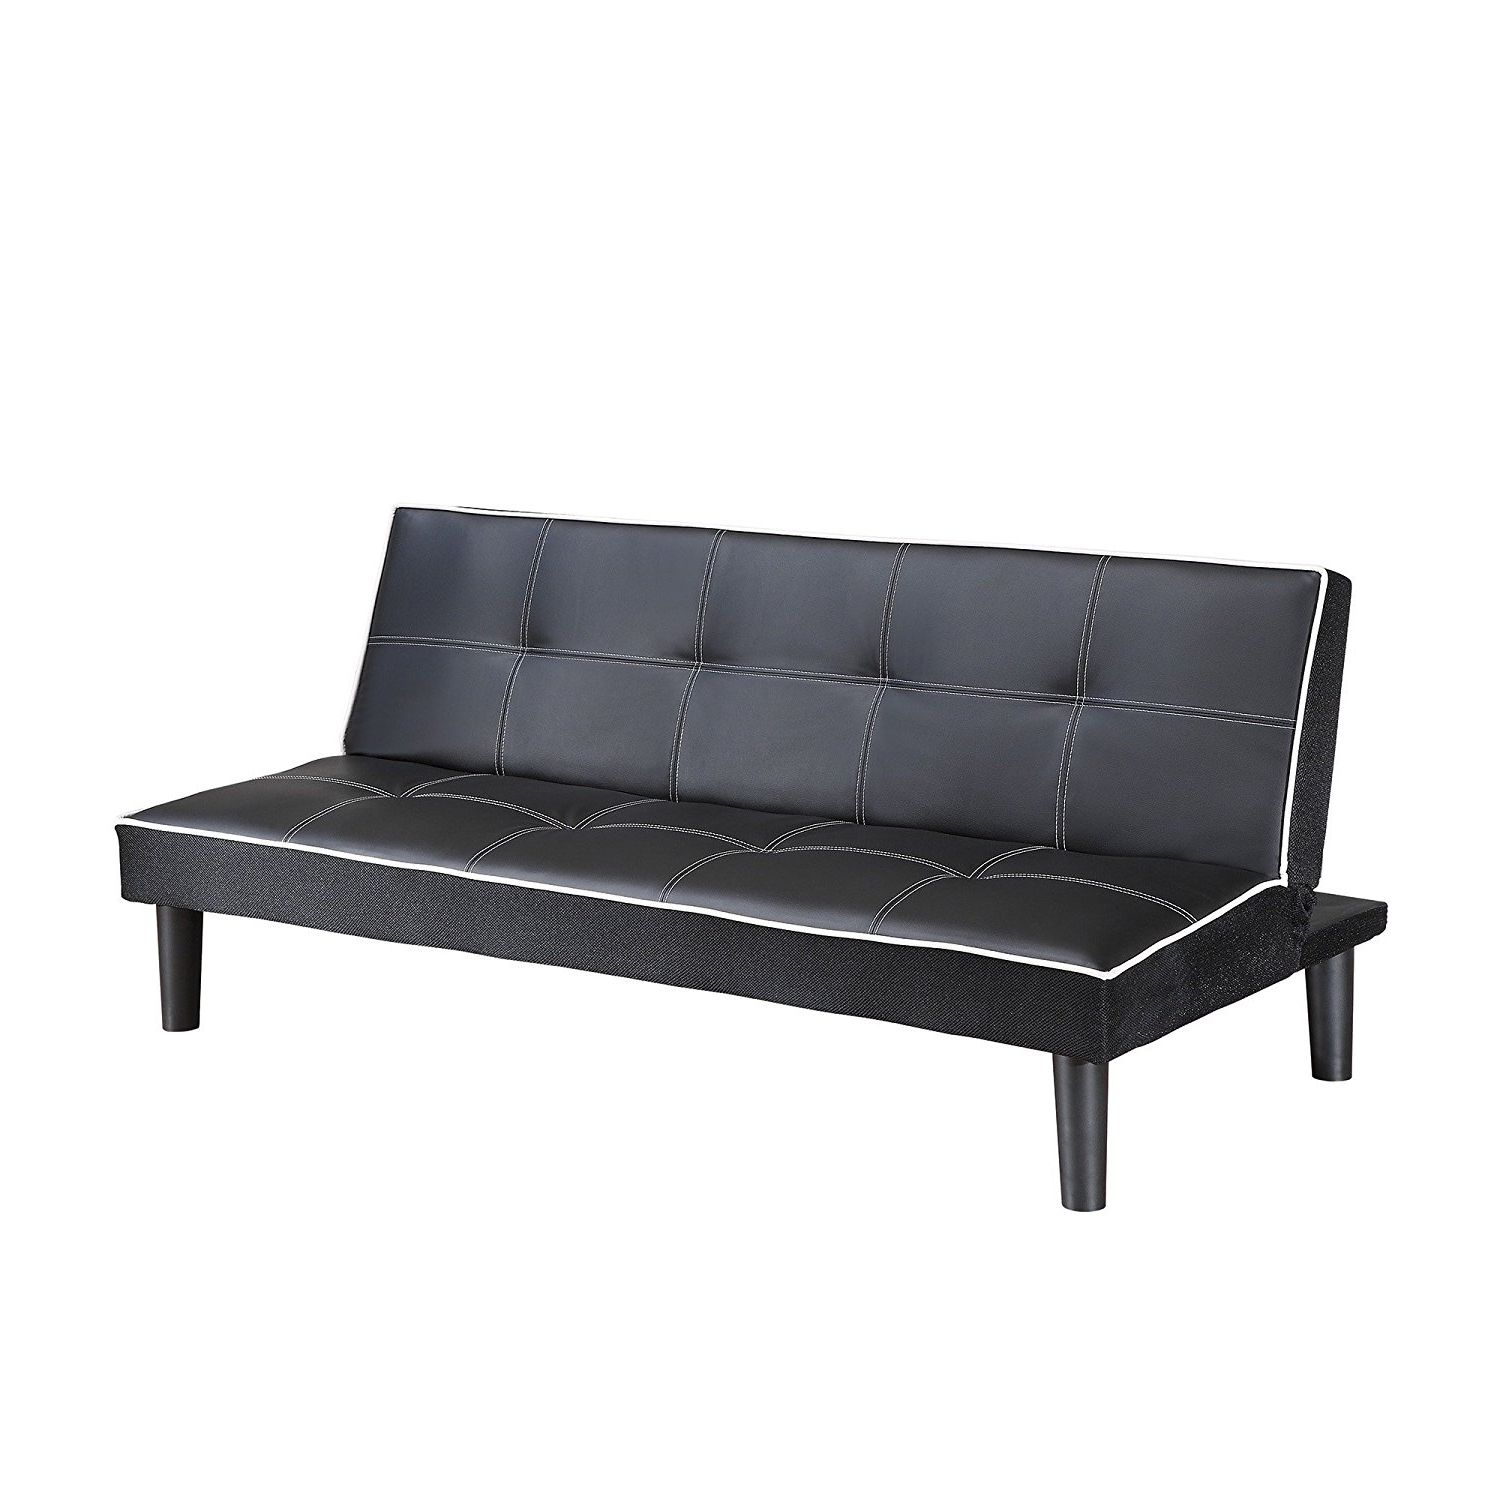 Felton Modern Style Pullout Sleeper Sofas Black For Trendy Buy Transitional Sofa Bed With Tufted Back And Armless (View 18 of 20)